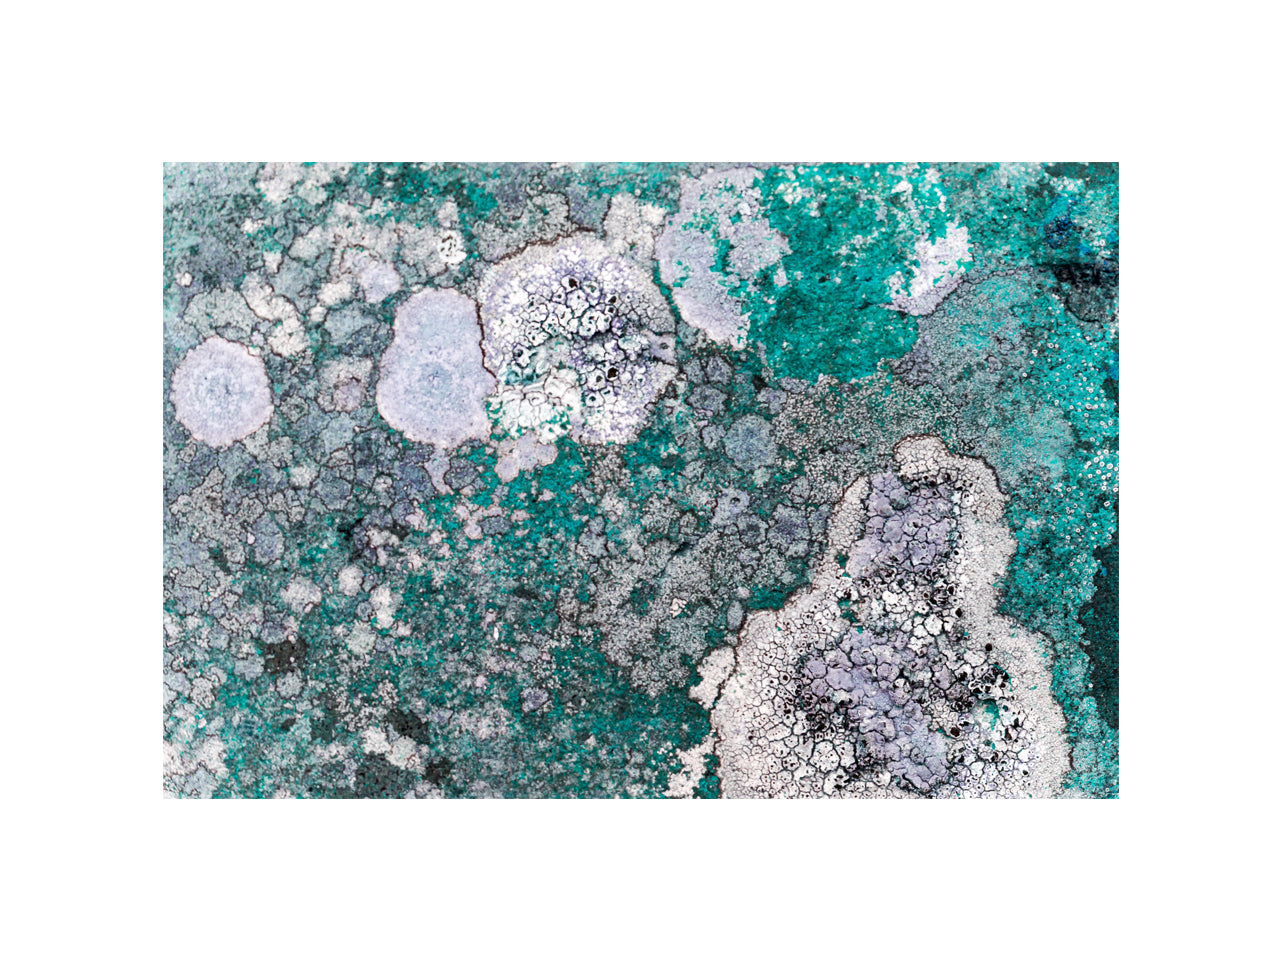 Patina and Decay, Turquoise I